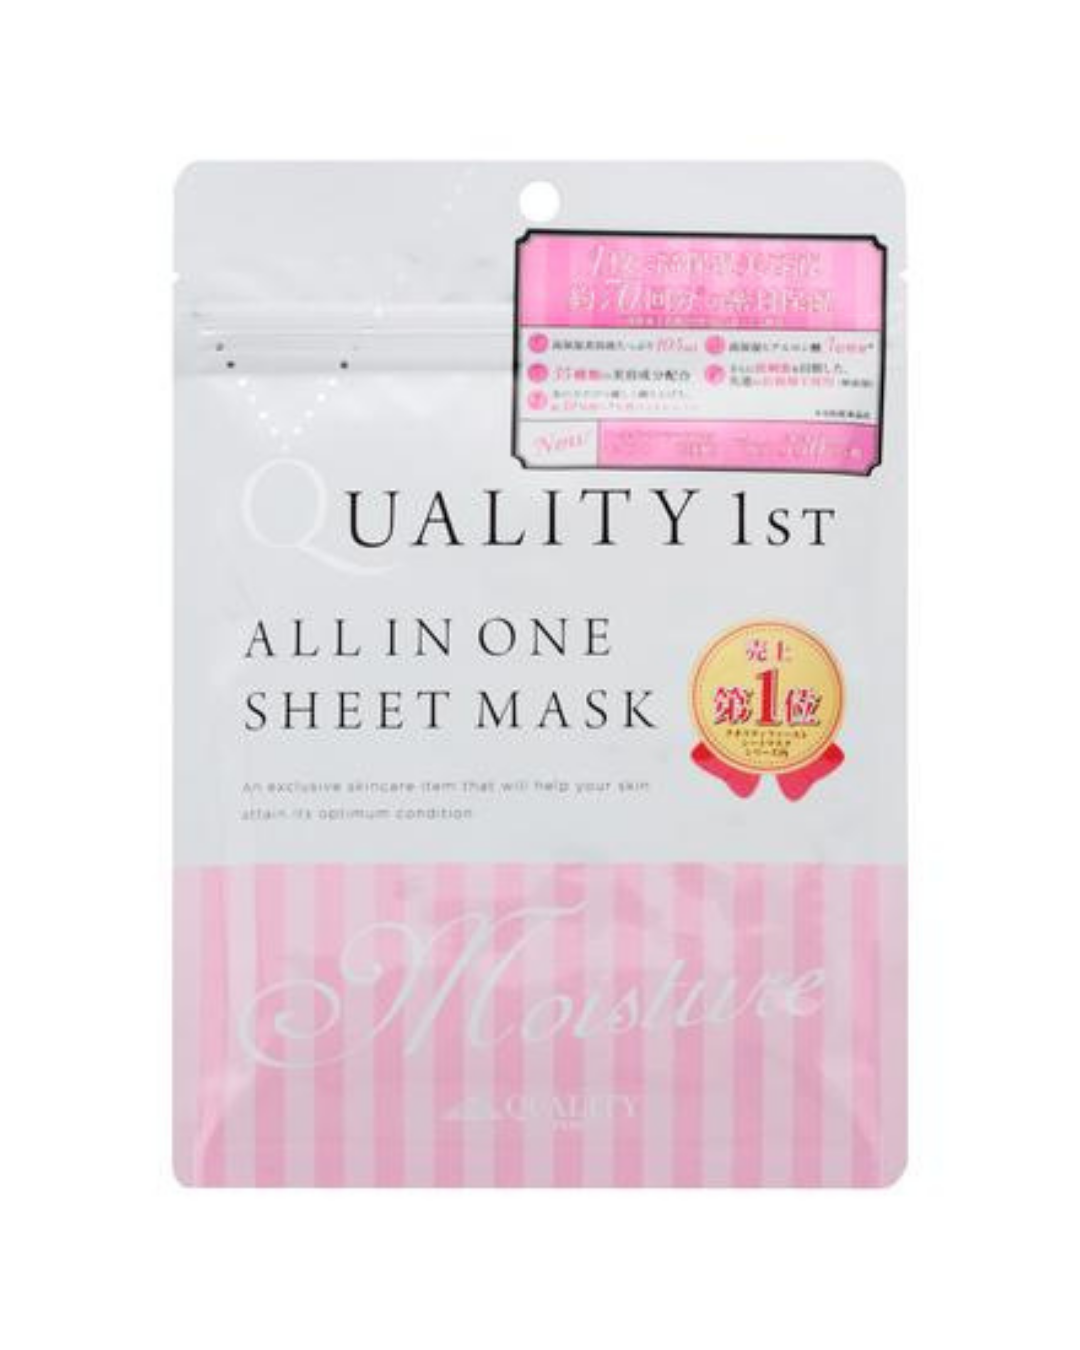 Quality 1st All-in-One Moisture Mask Pack